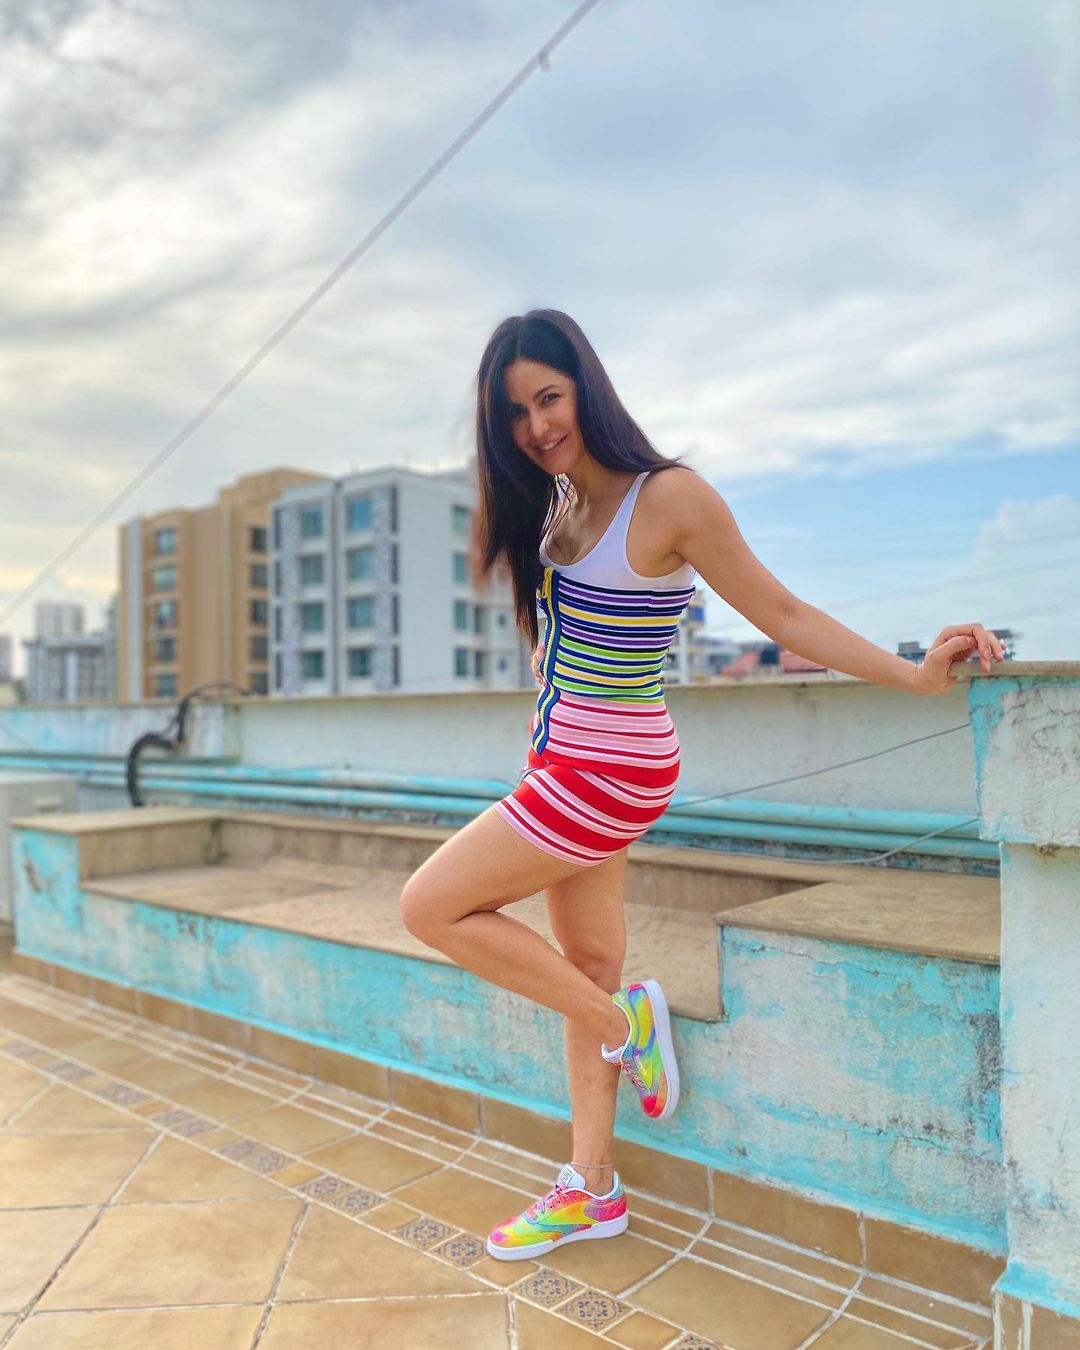 Katrina Kaif's toned body is put on display in the multicoloured dress